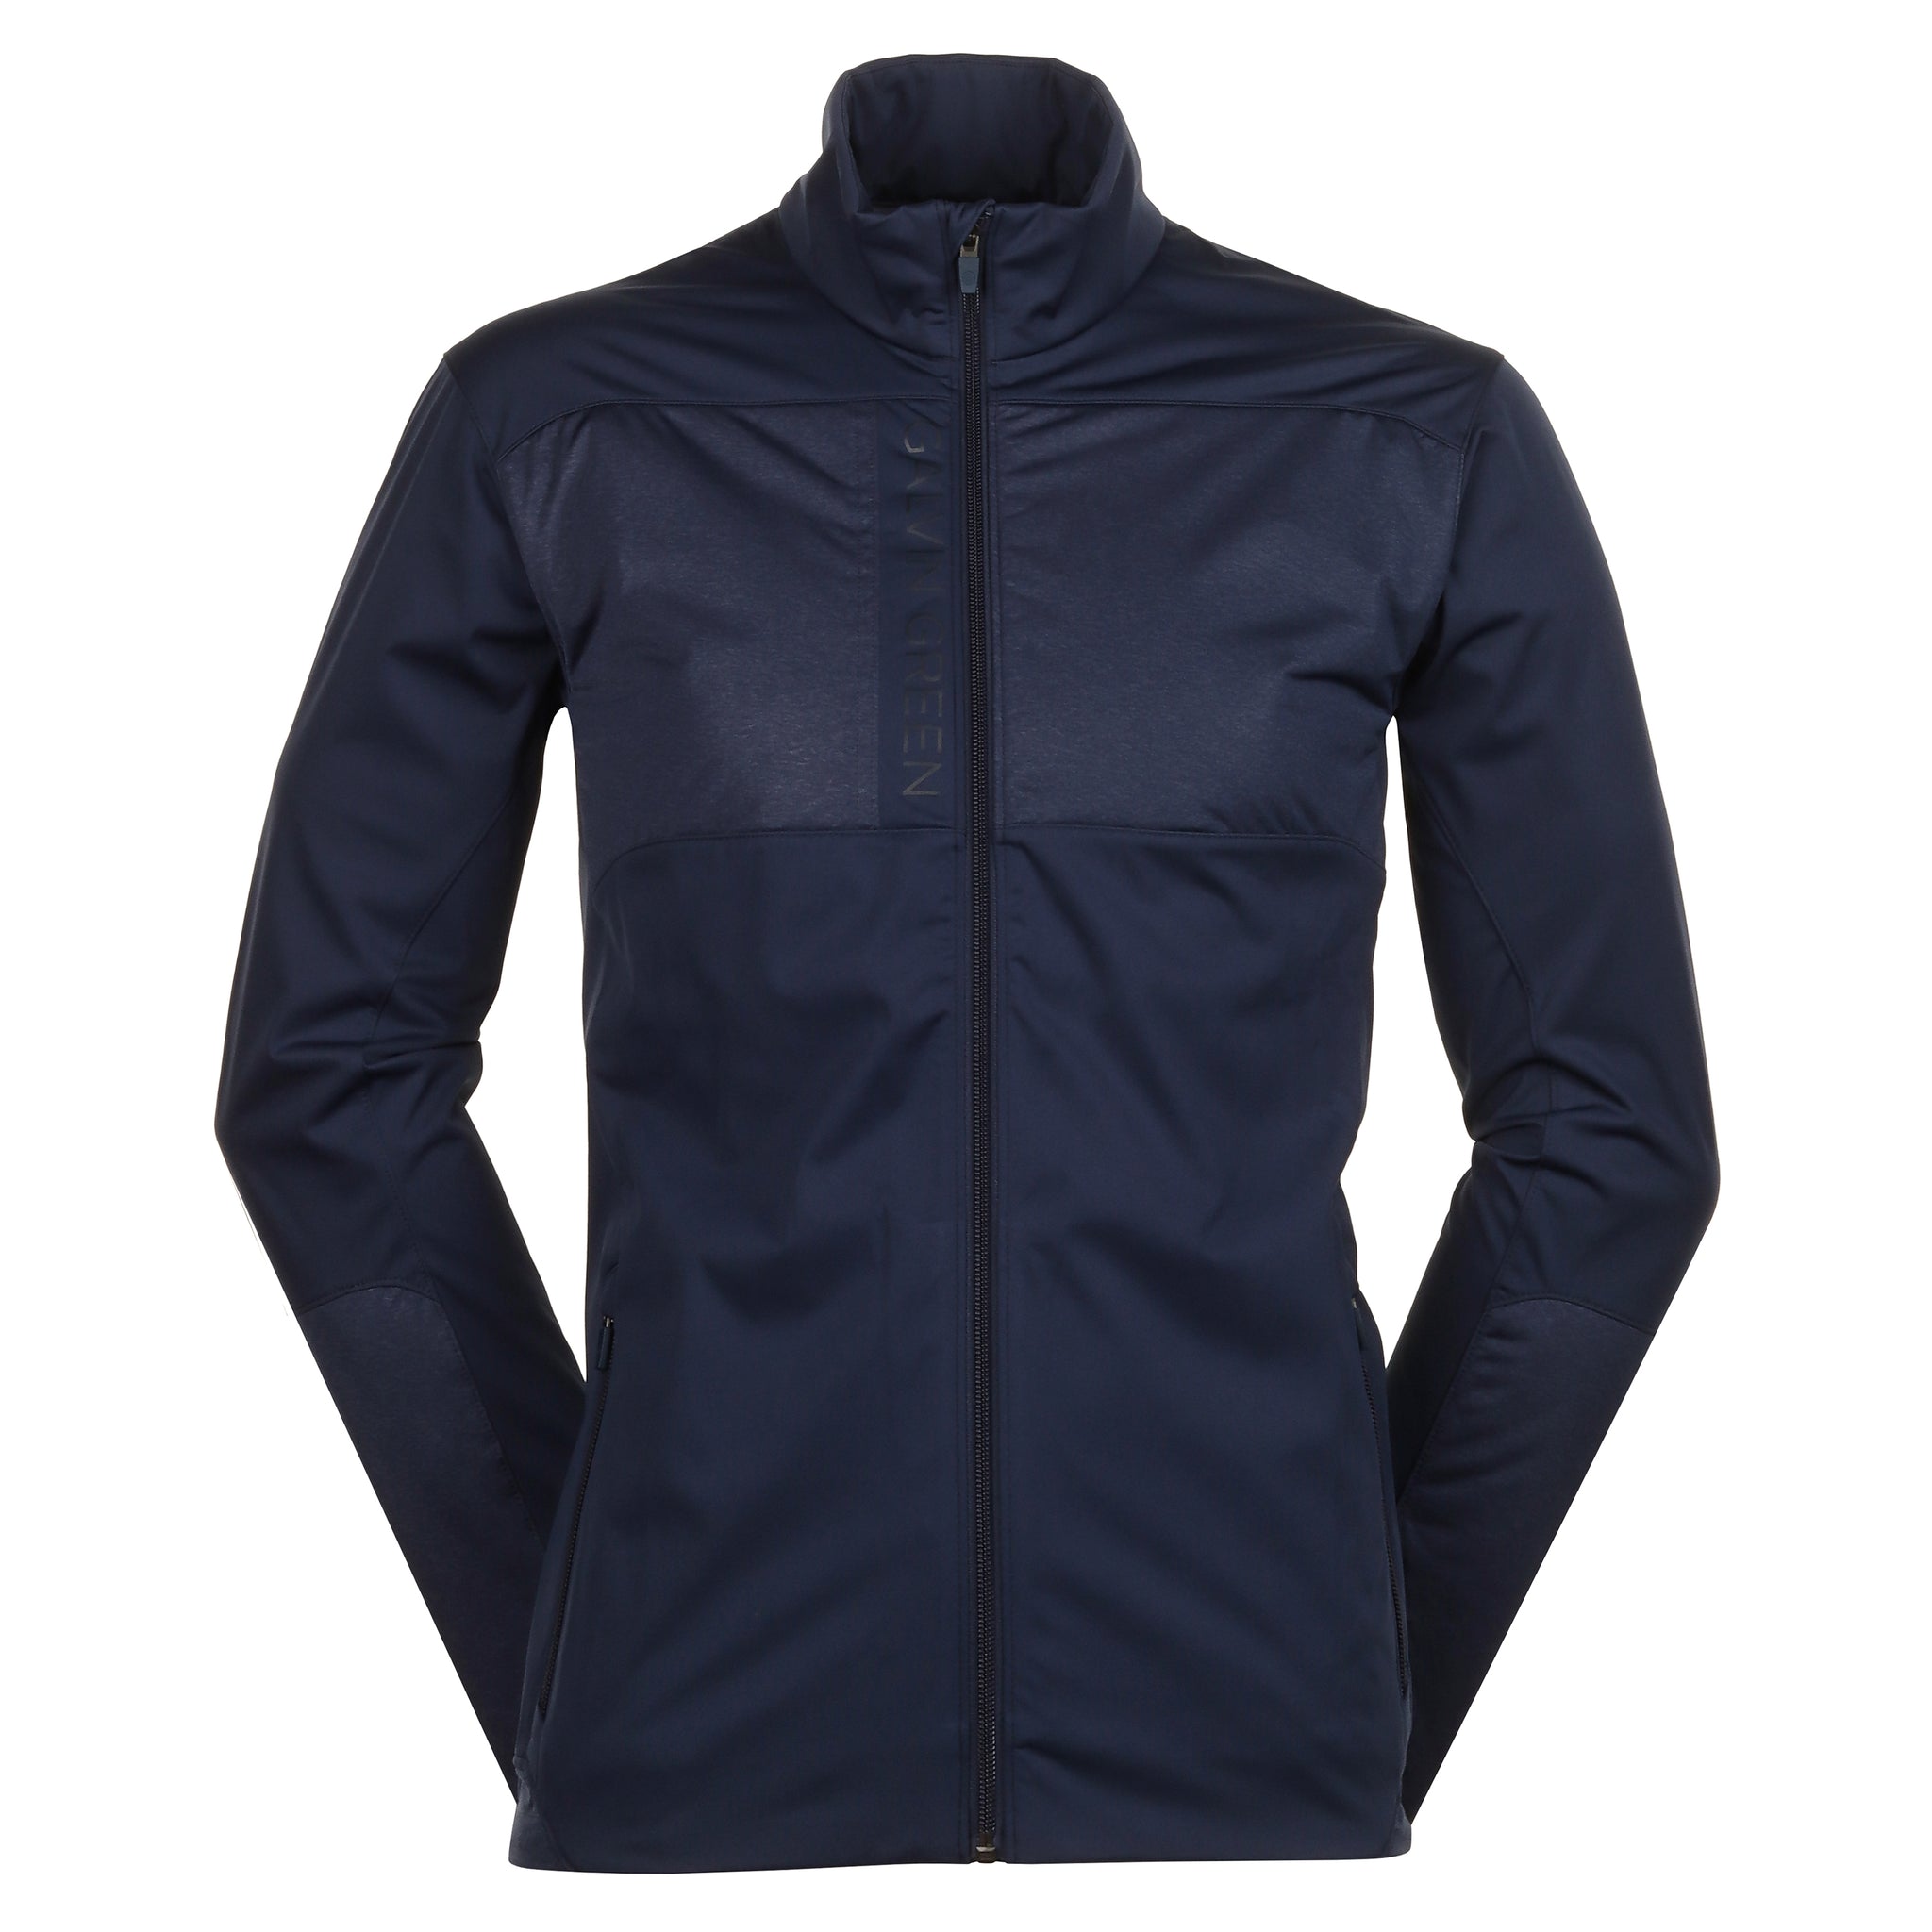 galvin-green-layton-interface-1-thermore-jacket-navy-9405